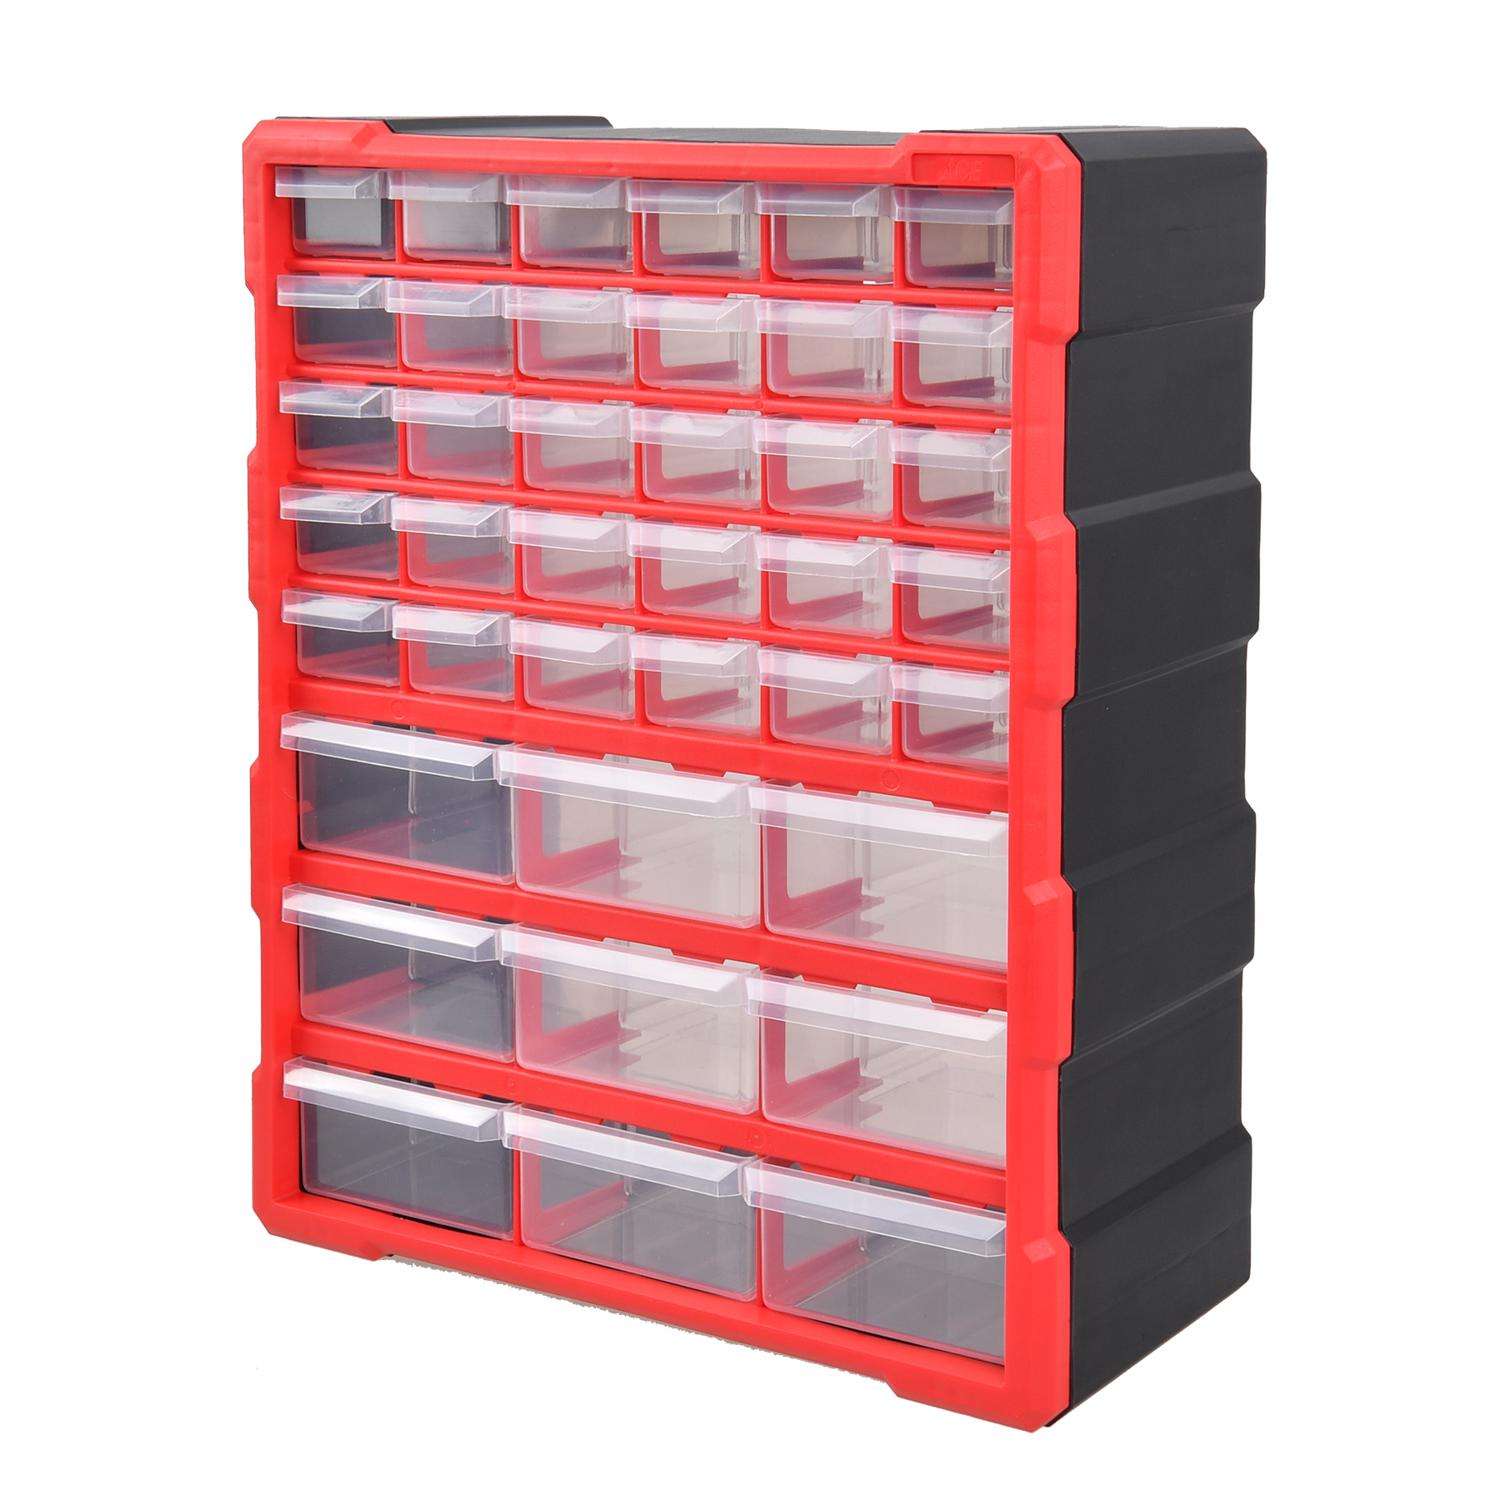 SAFE Rock Collection Box with 18 Compartments & 2 Sliding Latches